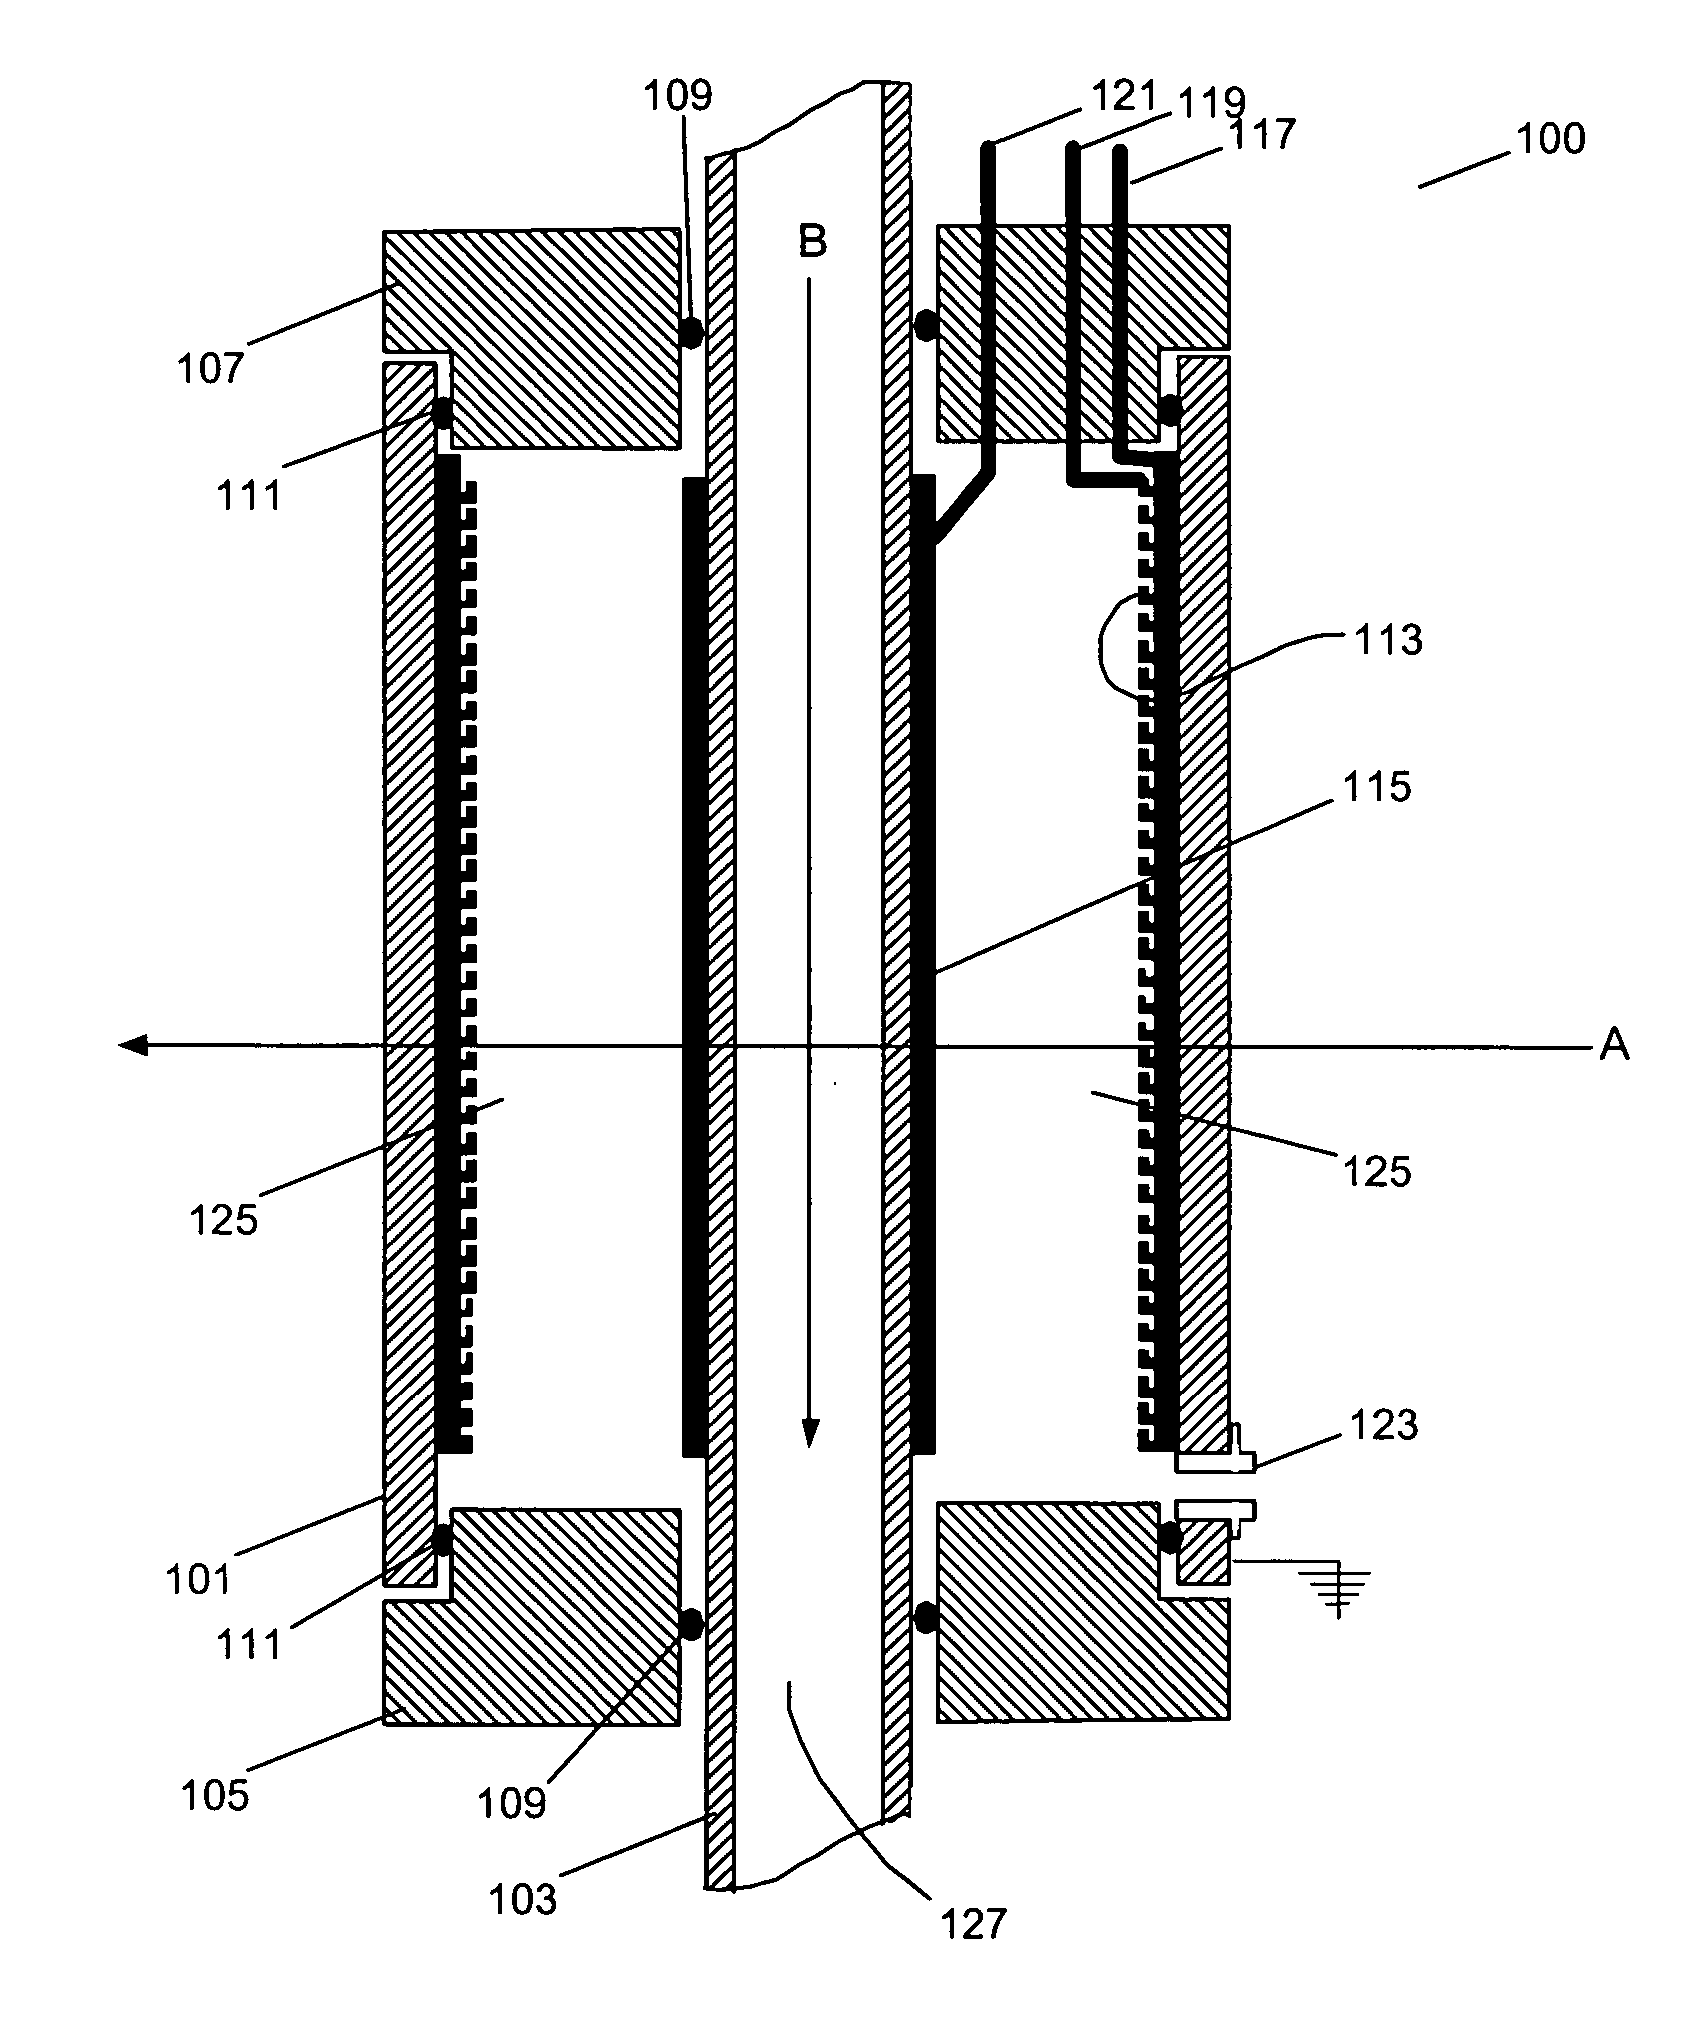 X-ray source with nonparallel geometry